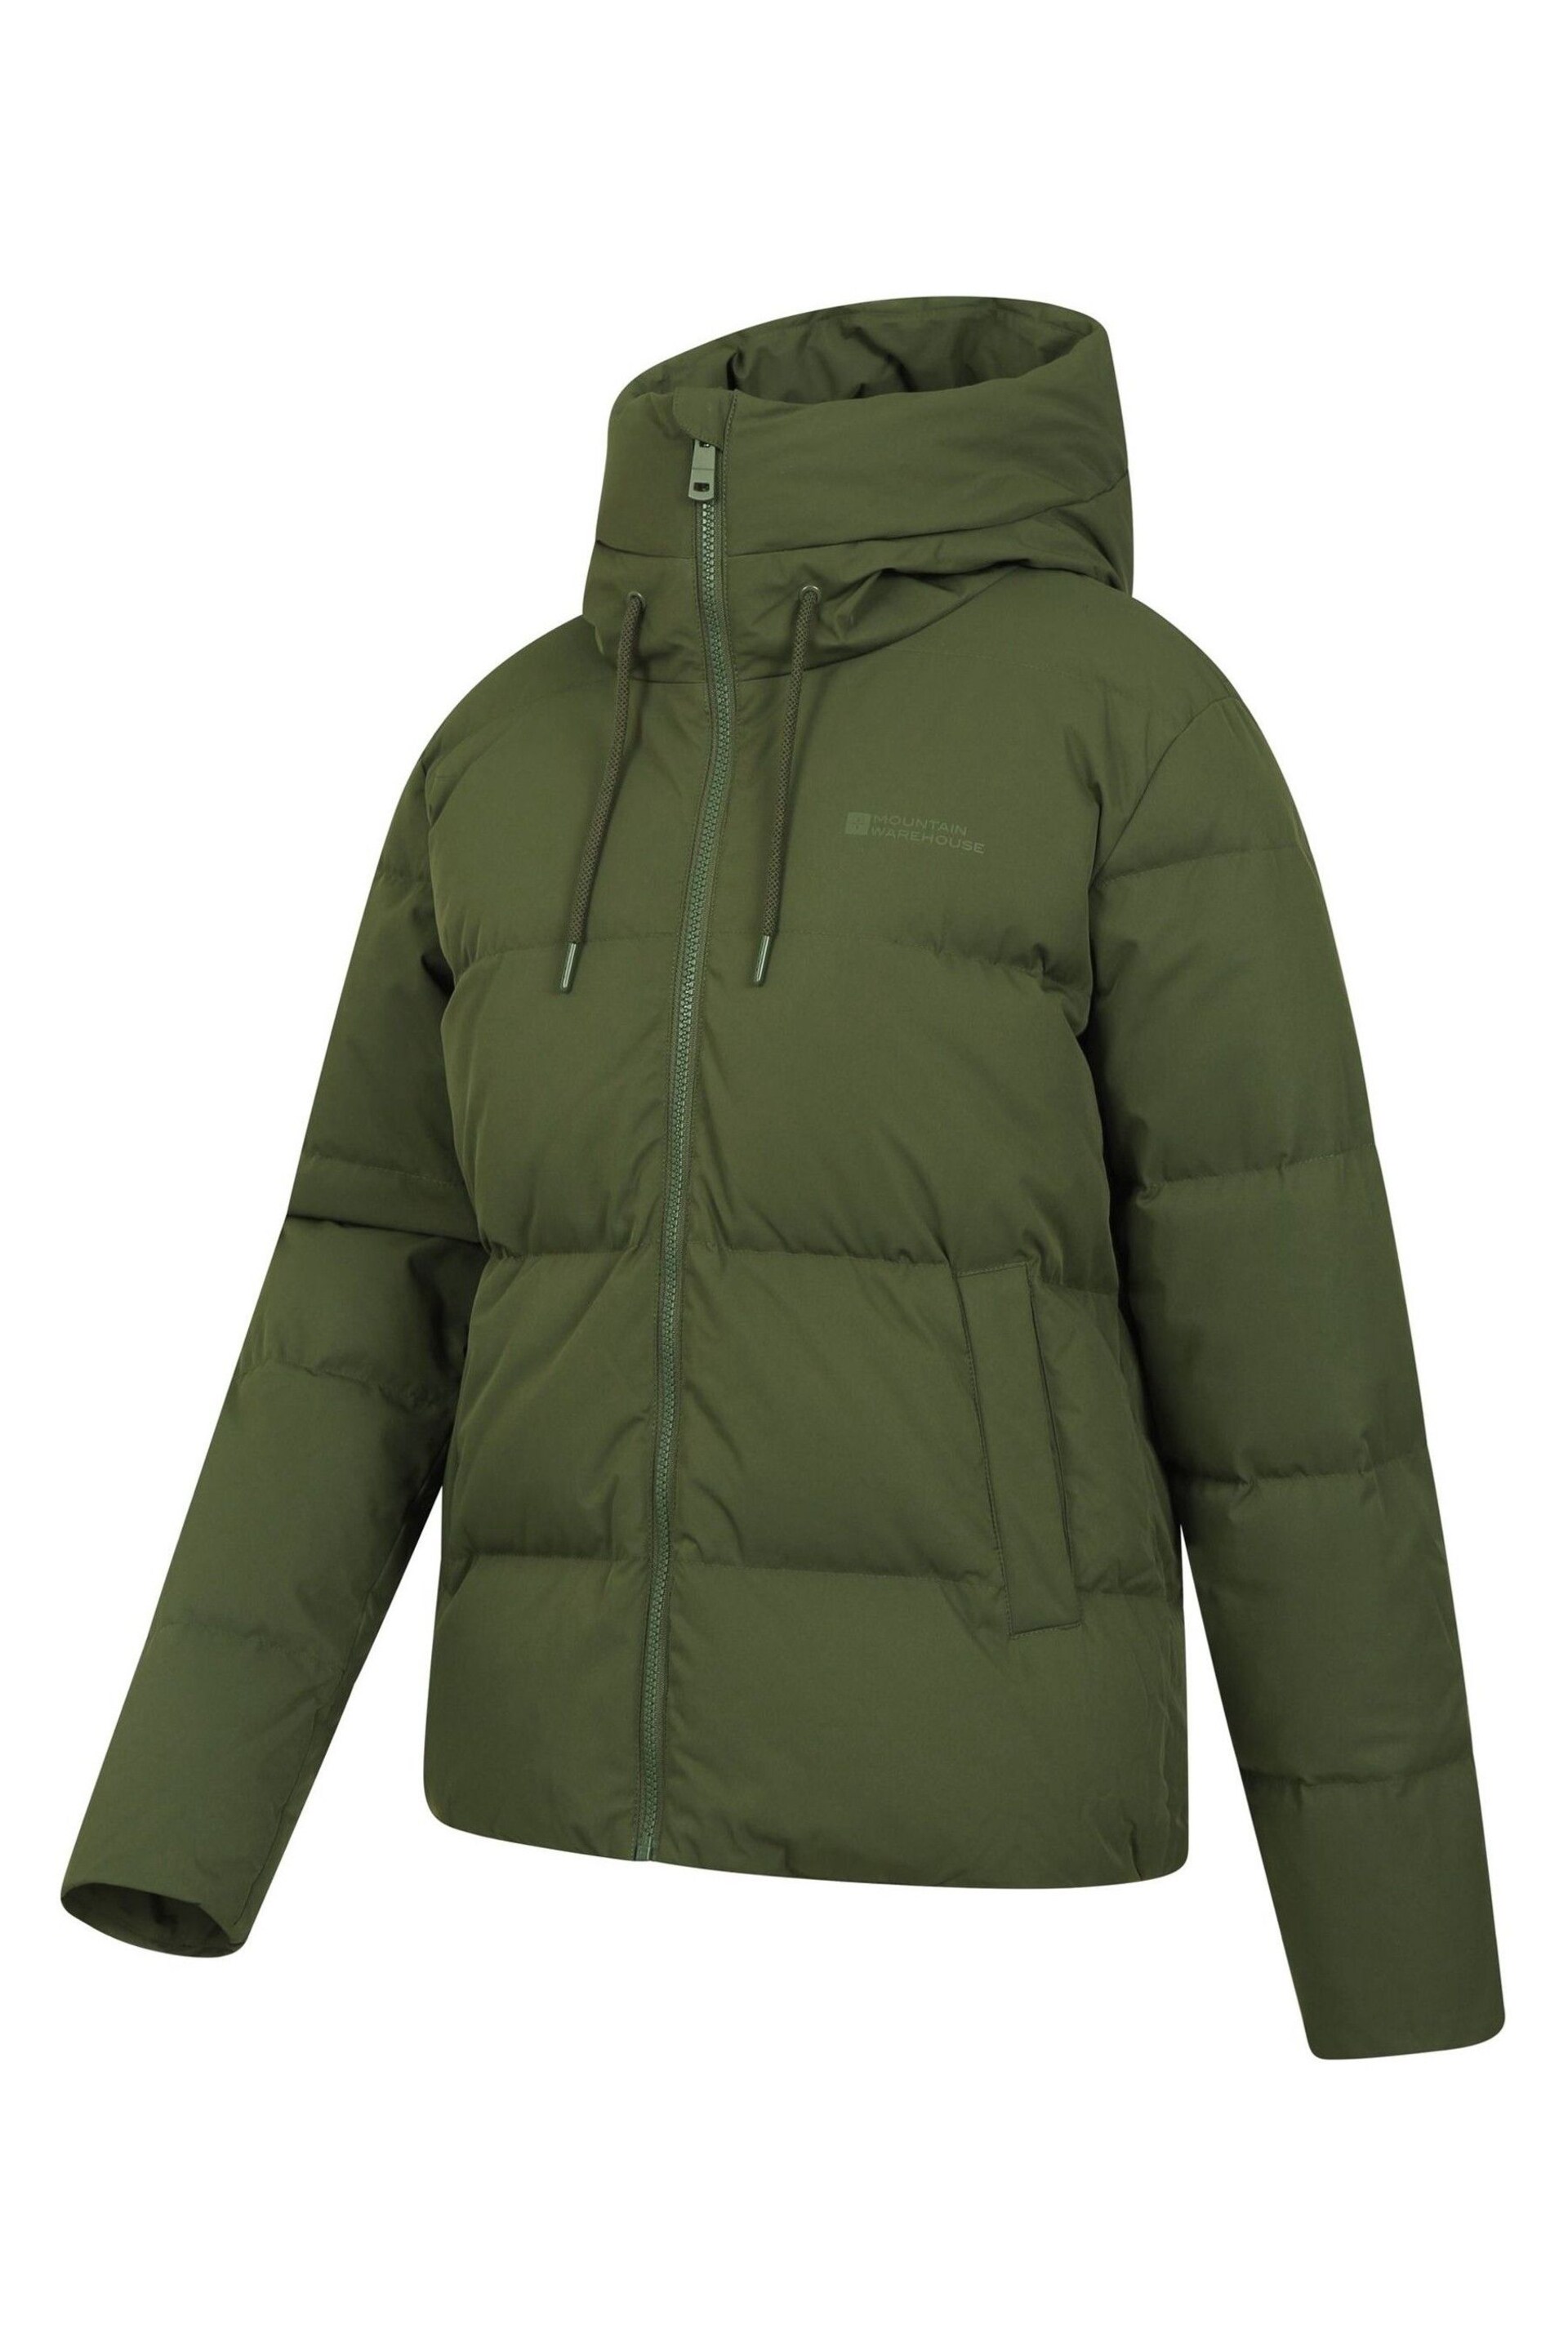 Mountain Warehouse Green Womens Cosy Extreme Short Down Jacket - Image 4 of 5